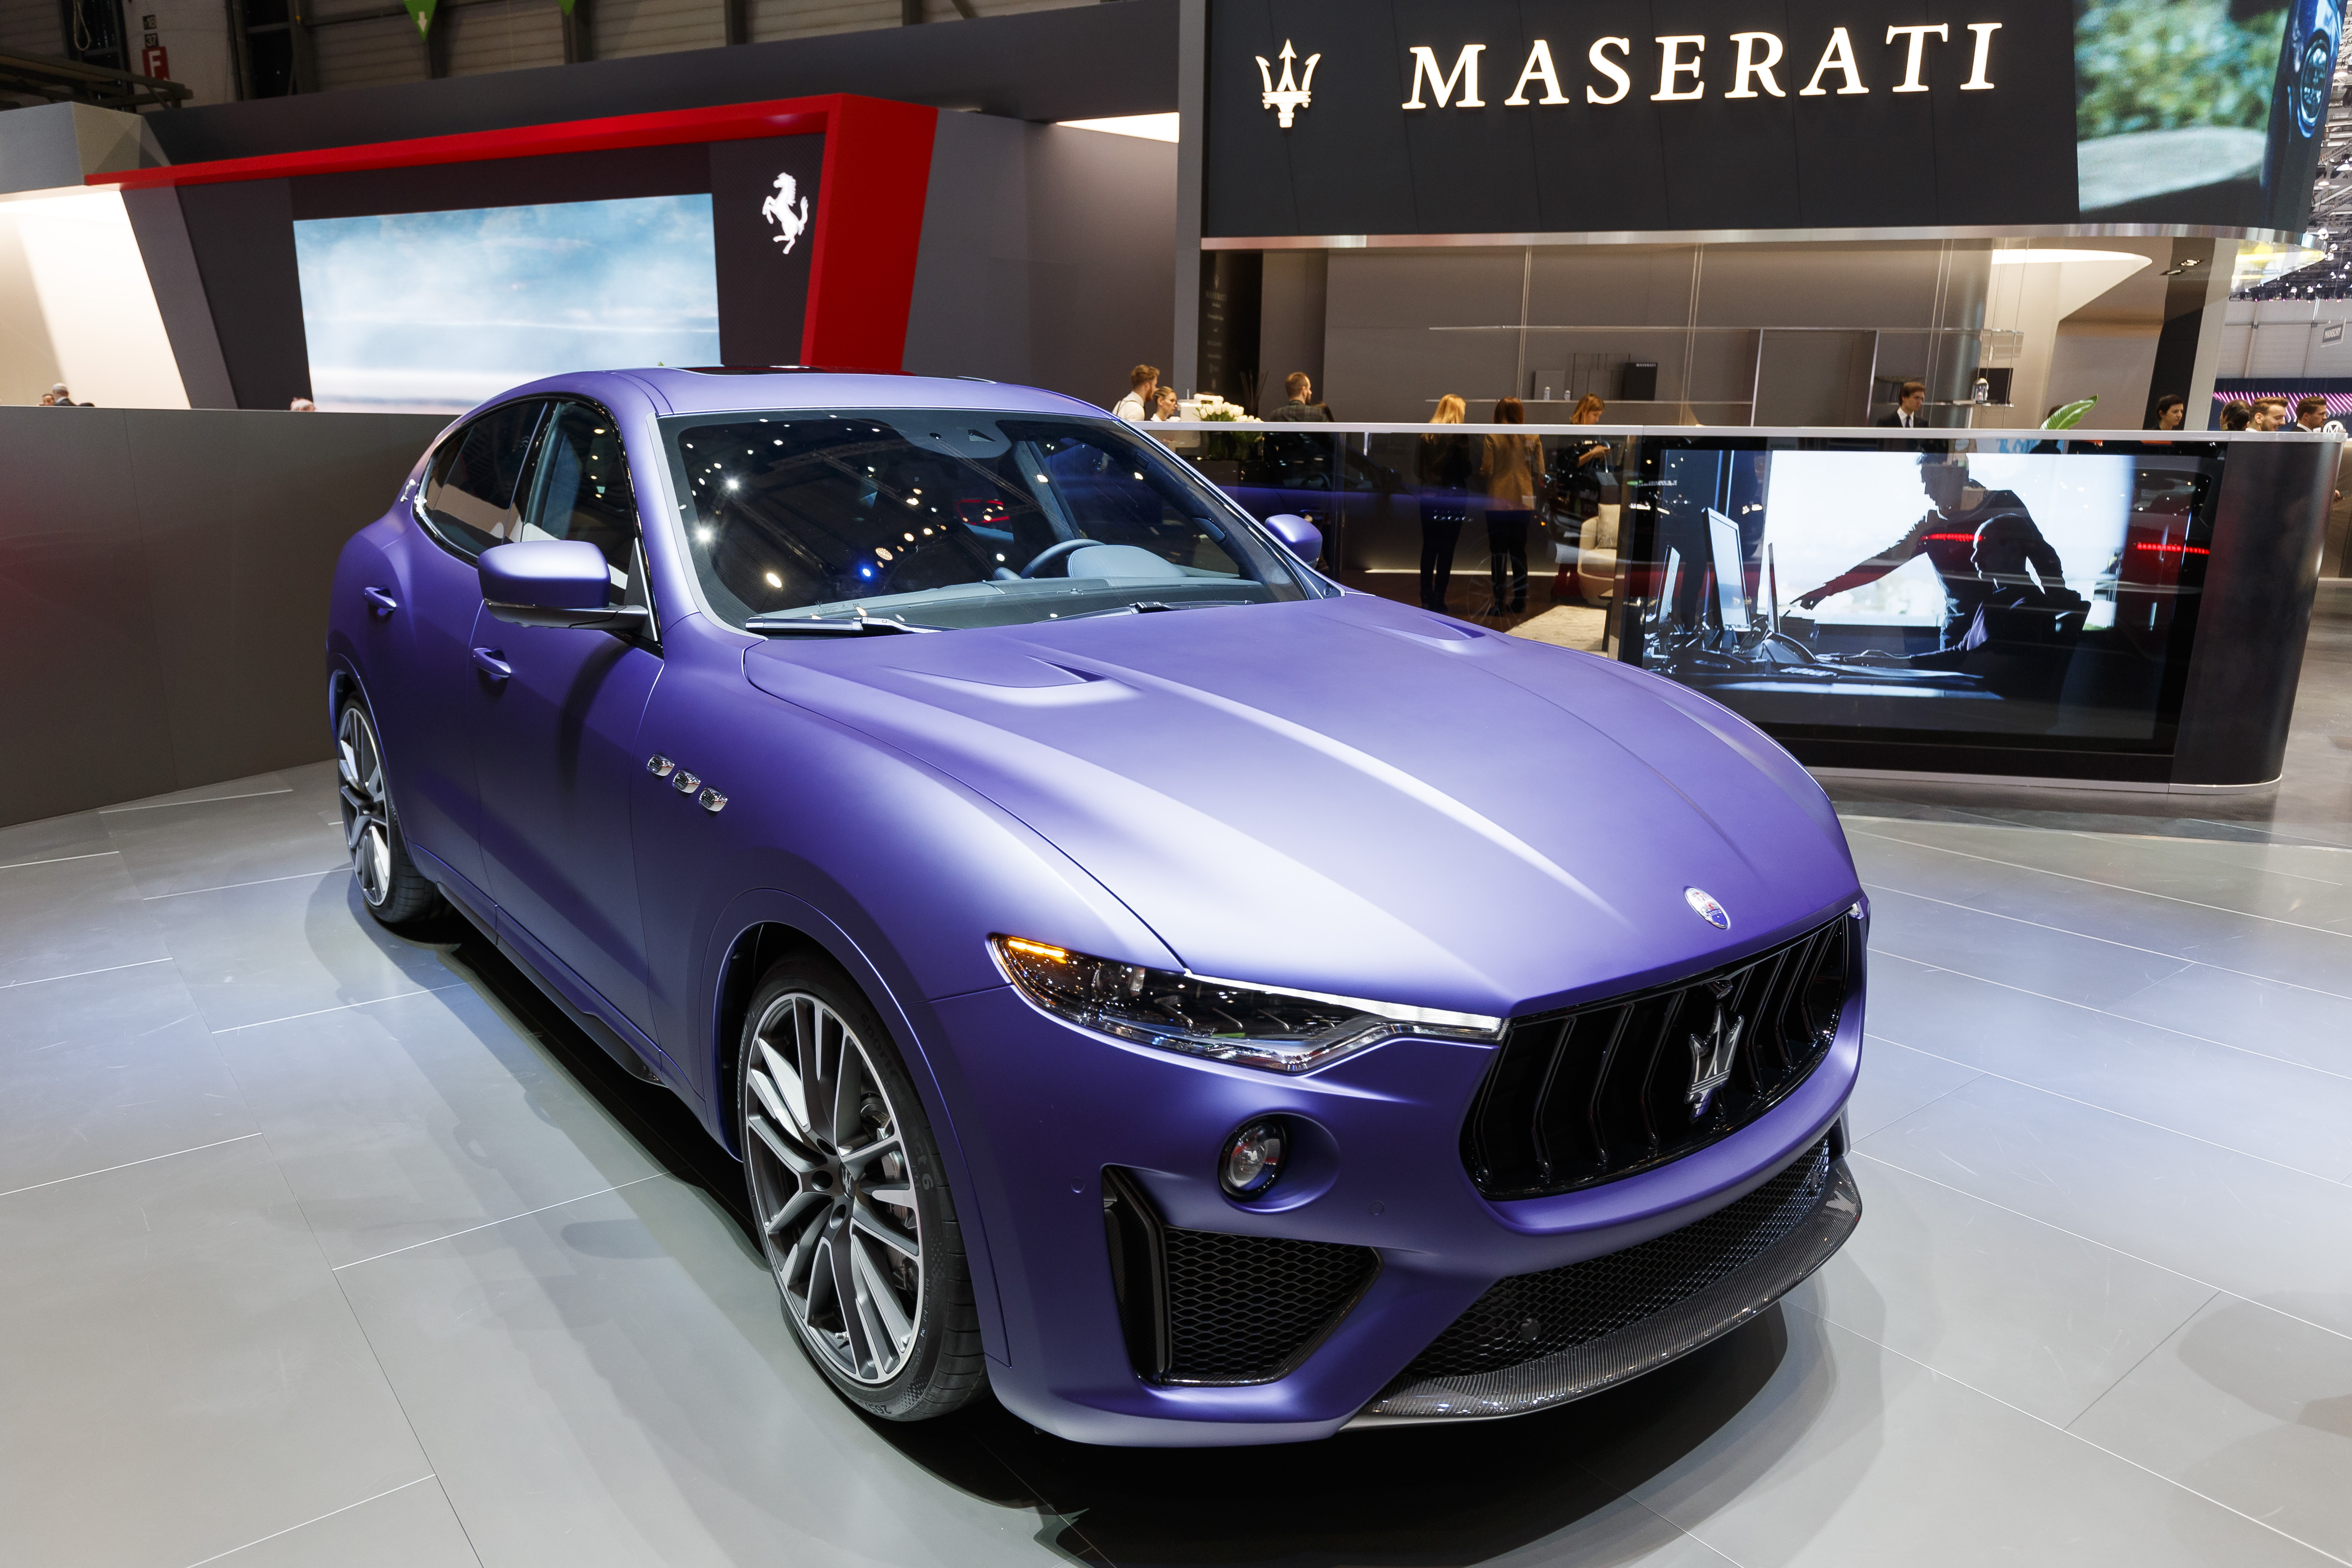 The new Maserati Levante Trofeo is presented during the press day at the 89th Geneva International Motor Show in Geneva, Switzerland, Wednesday, March 6, 2019. The Motor Show will open its gates to the public from 7 to 17 March presenting more than 180 exhibitors and more than 100 world and European premieres. (Cyril Zingaro/Keystone via AP)